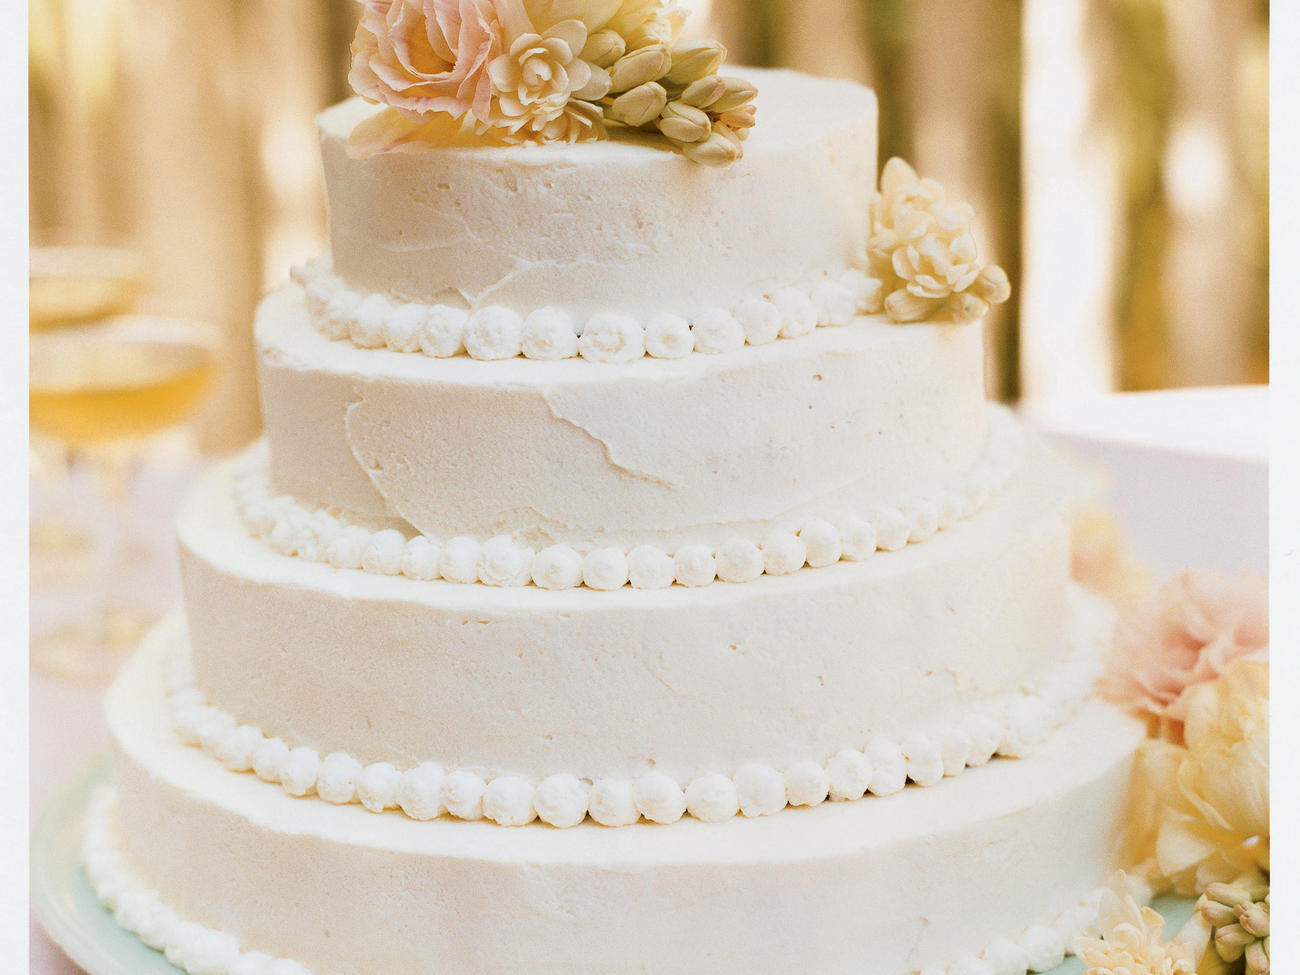 How to Make Your Own Beautiful Wedding Cake